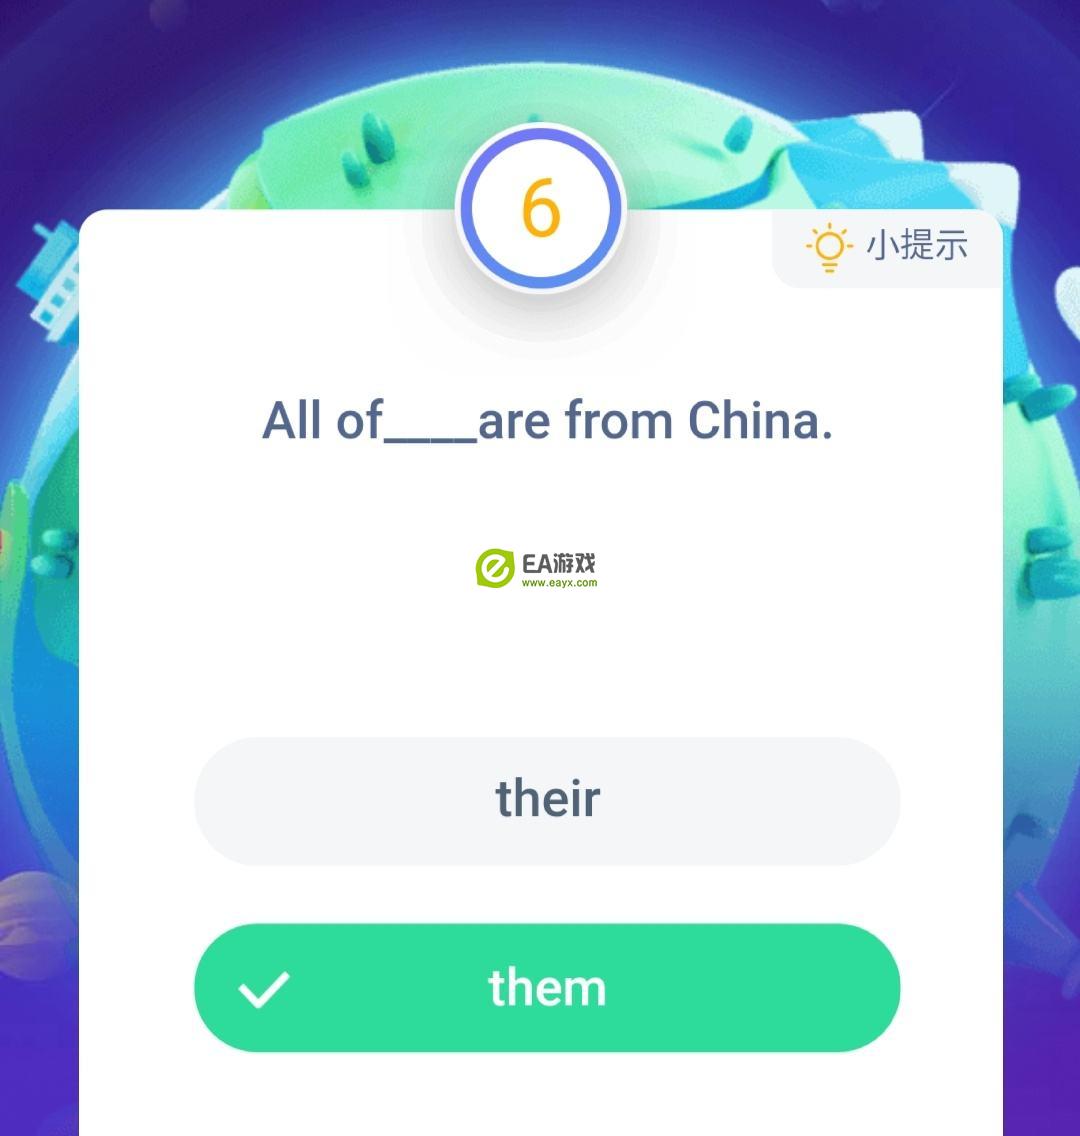 All of____are from China